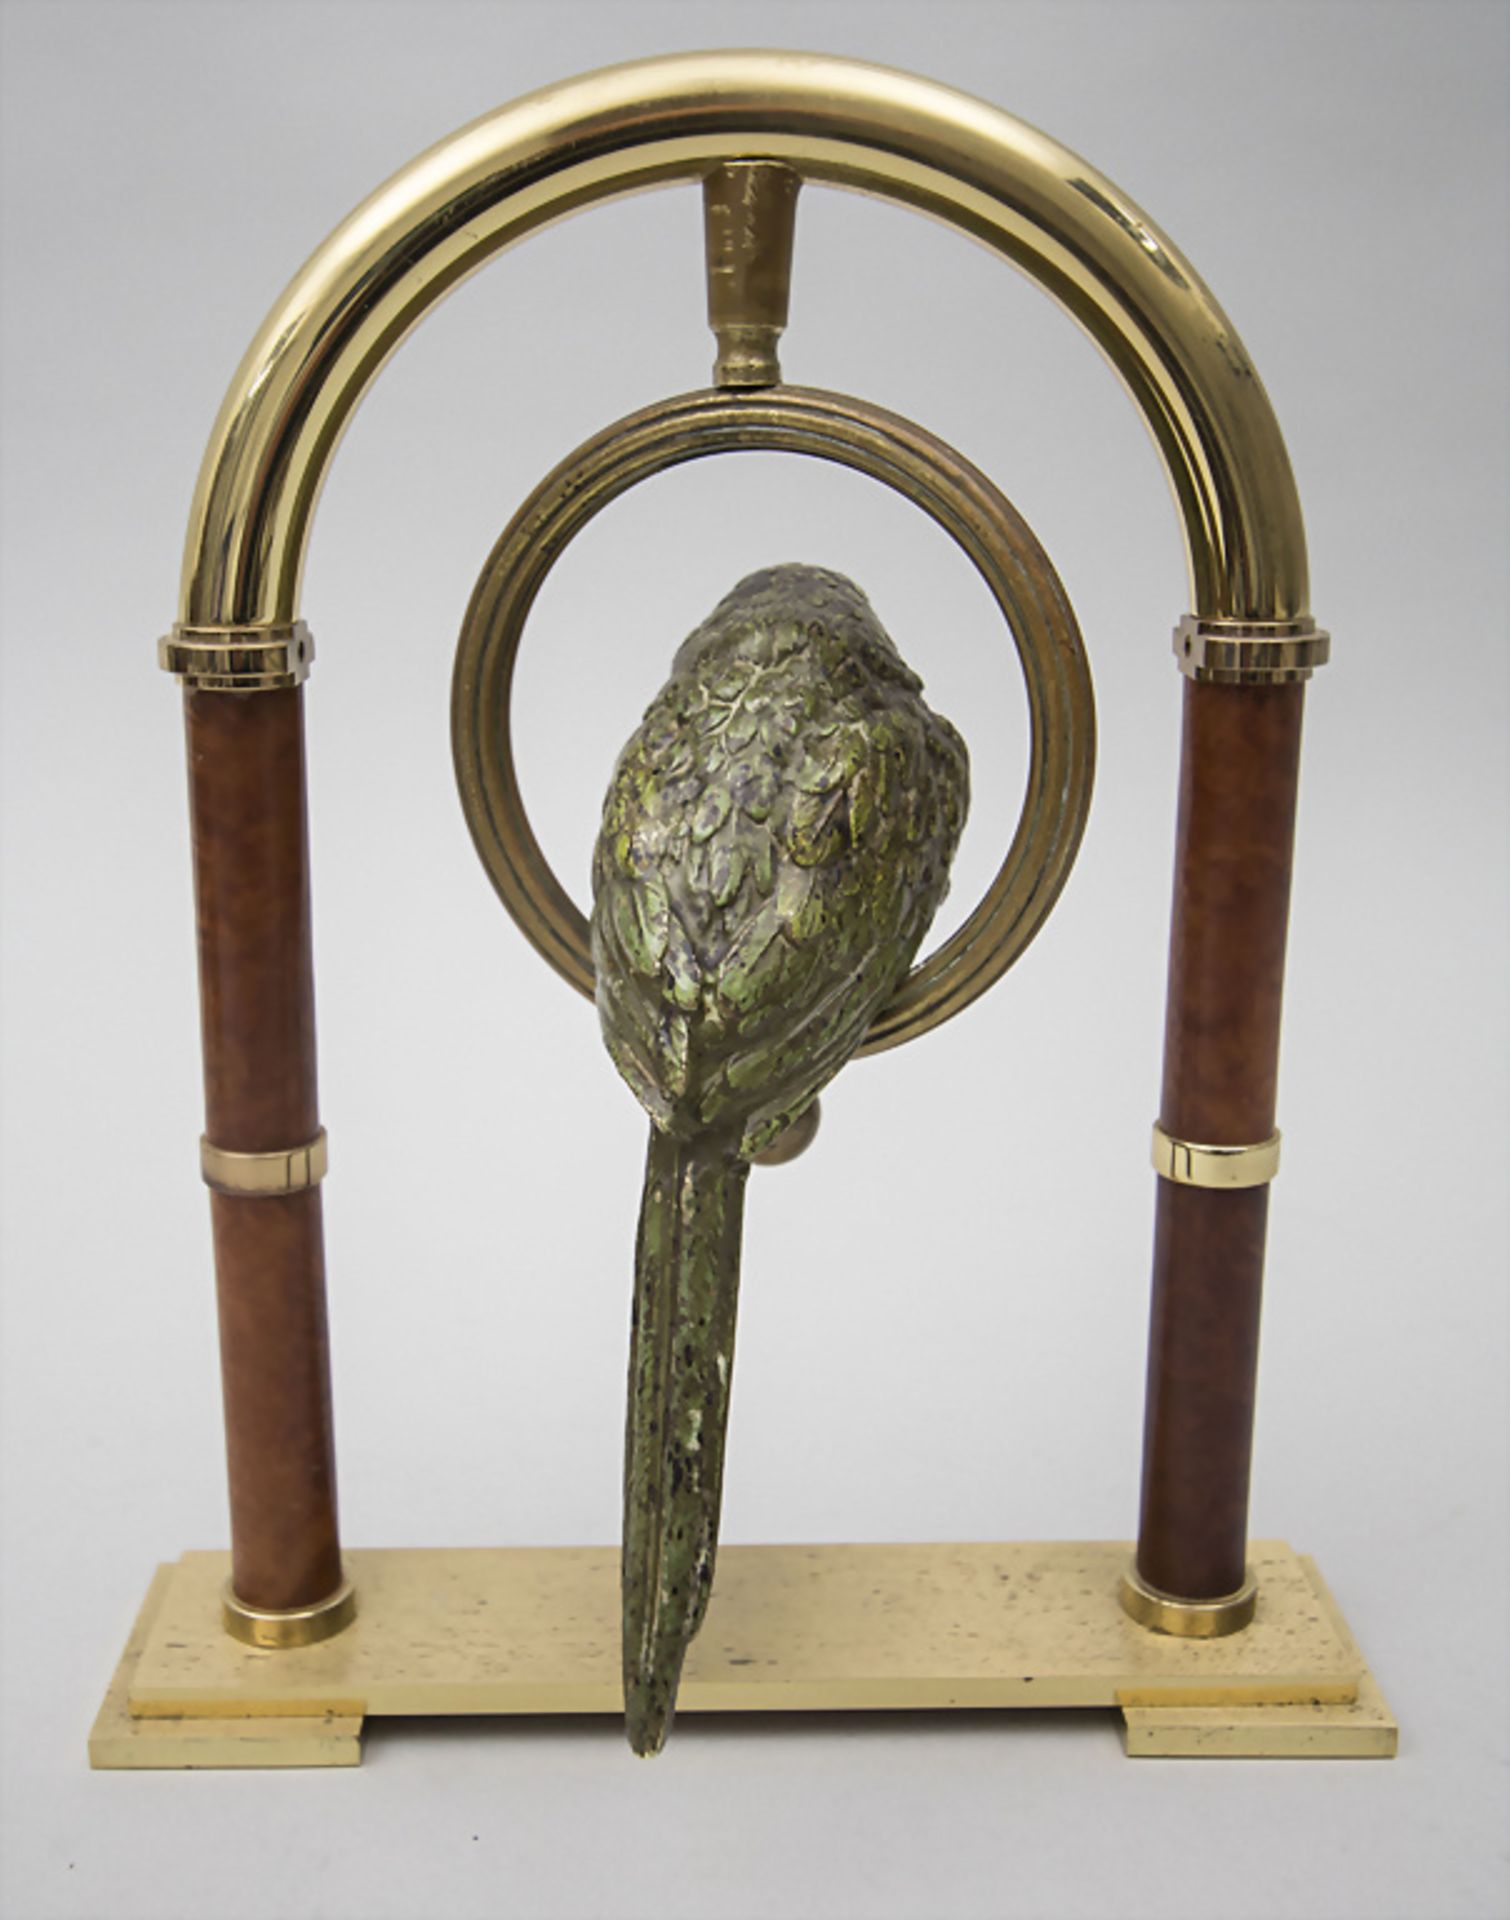 Bronze Papagei / A bronze parrot, 20. Jh. - Image 4 of 6